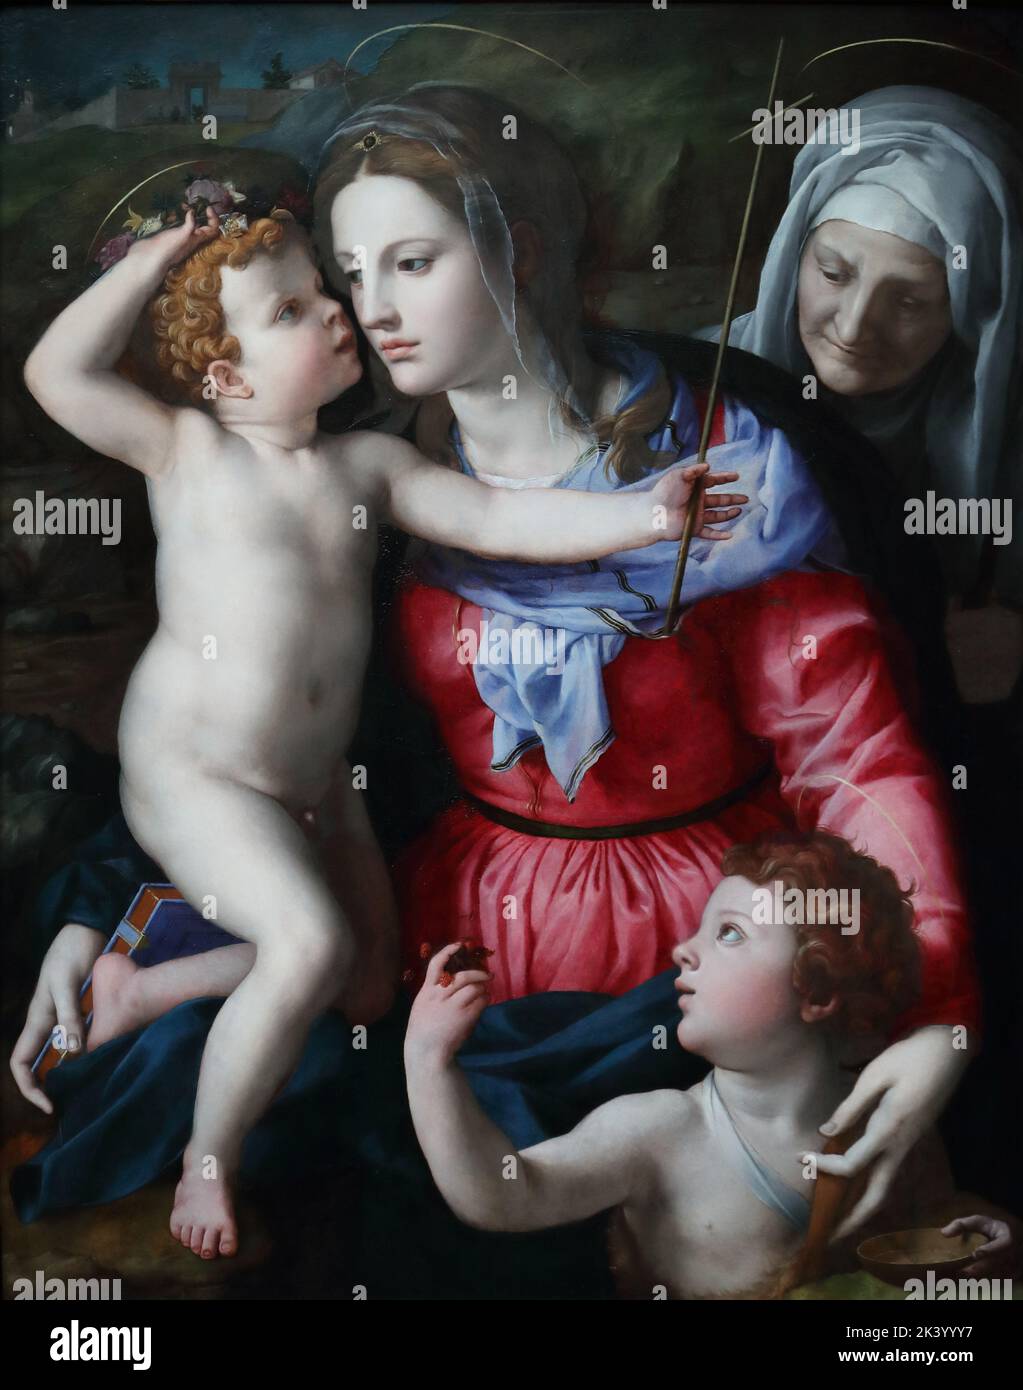 The Madonna and Child with Saint John the Baptist and Saint Elizabeth by Italian mannerist painter Agnolo Bronzino at the National Gallery, London, UK Stock Photo